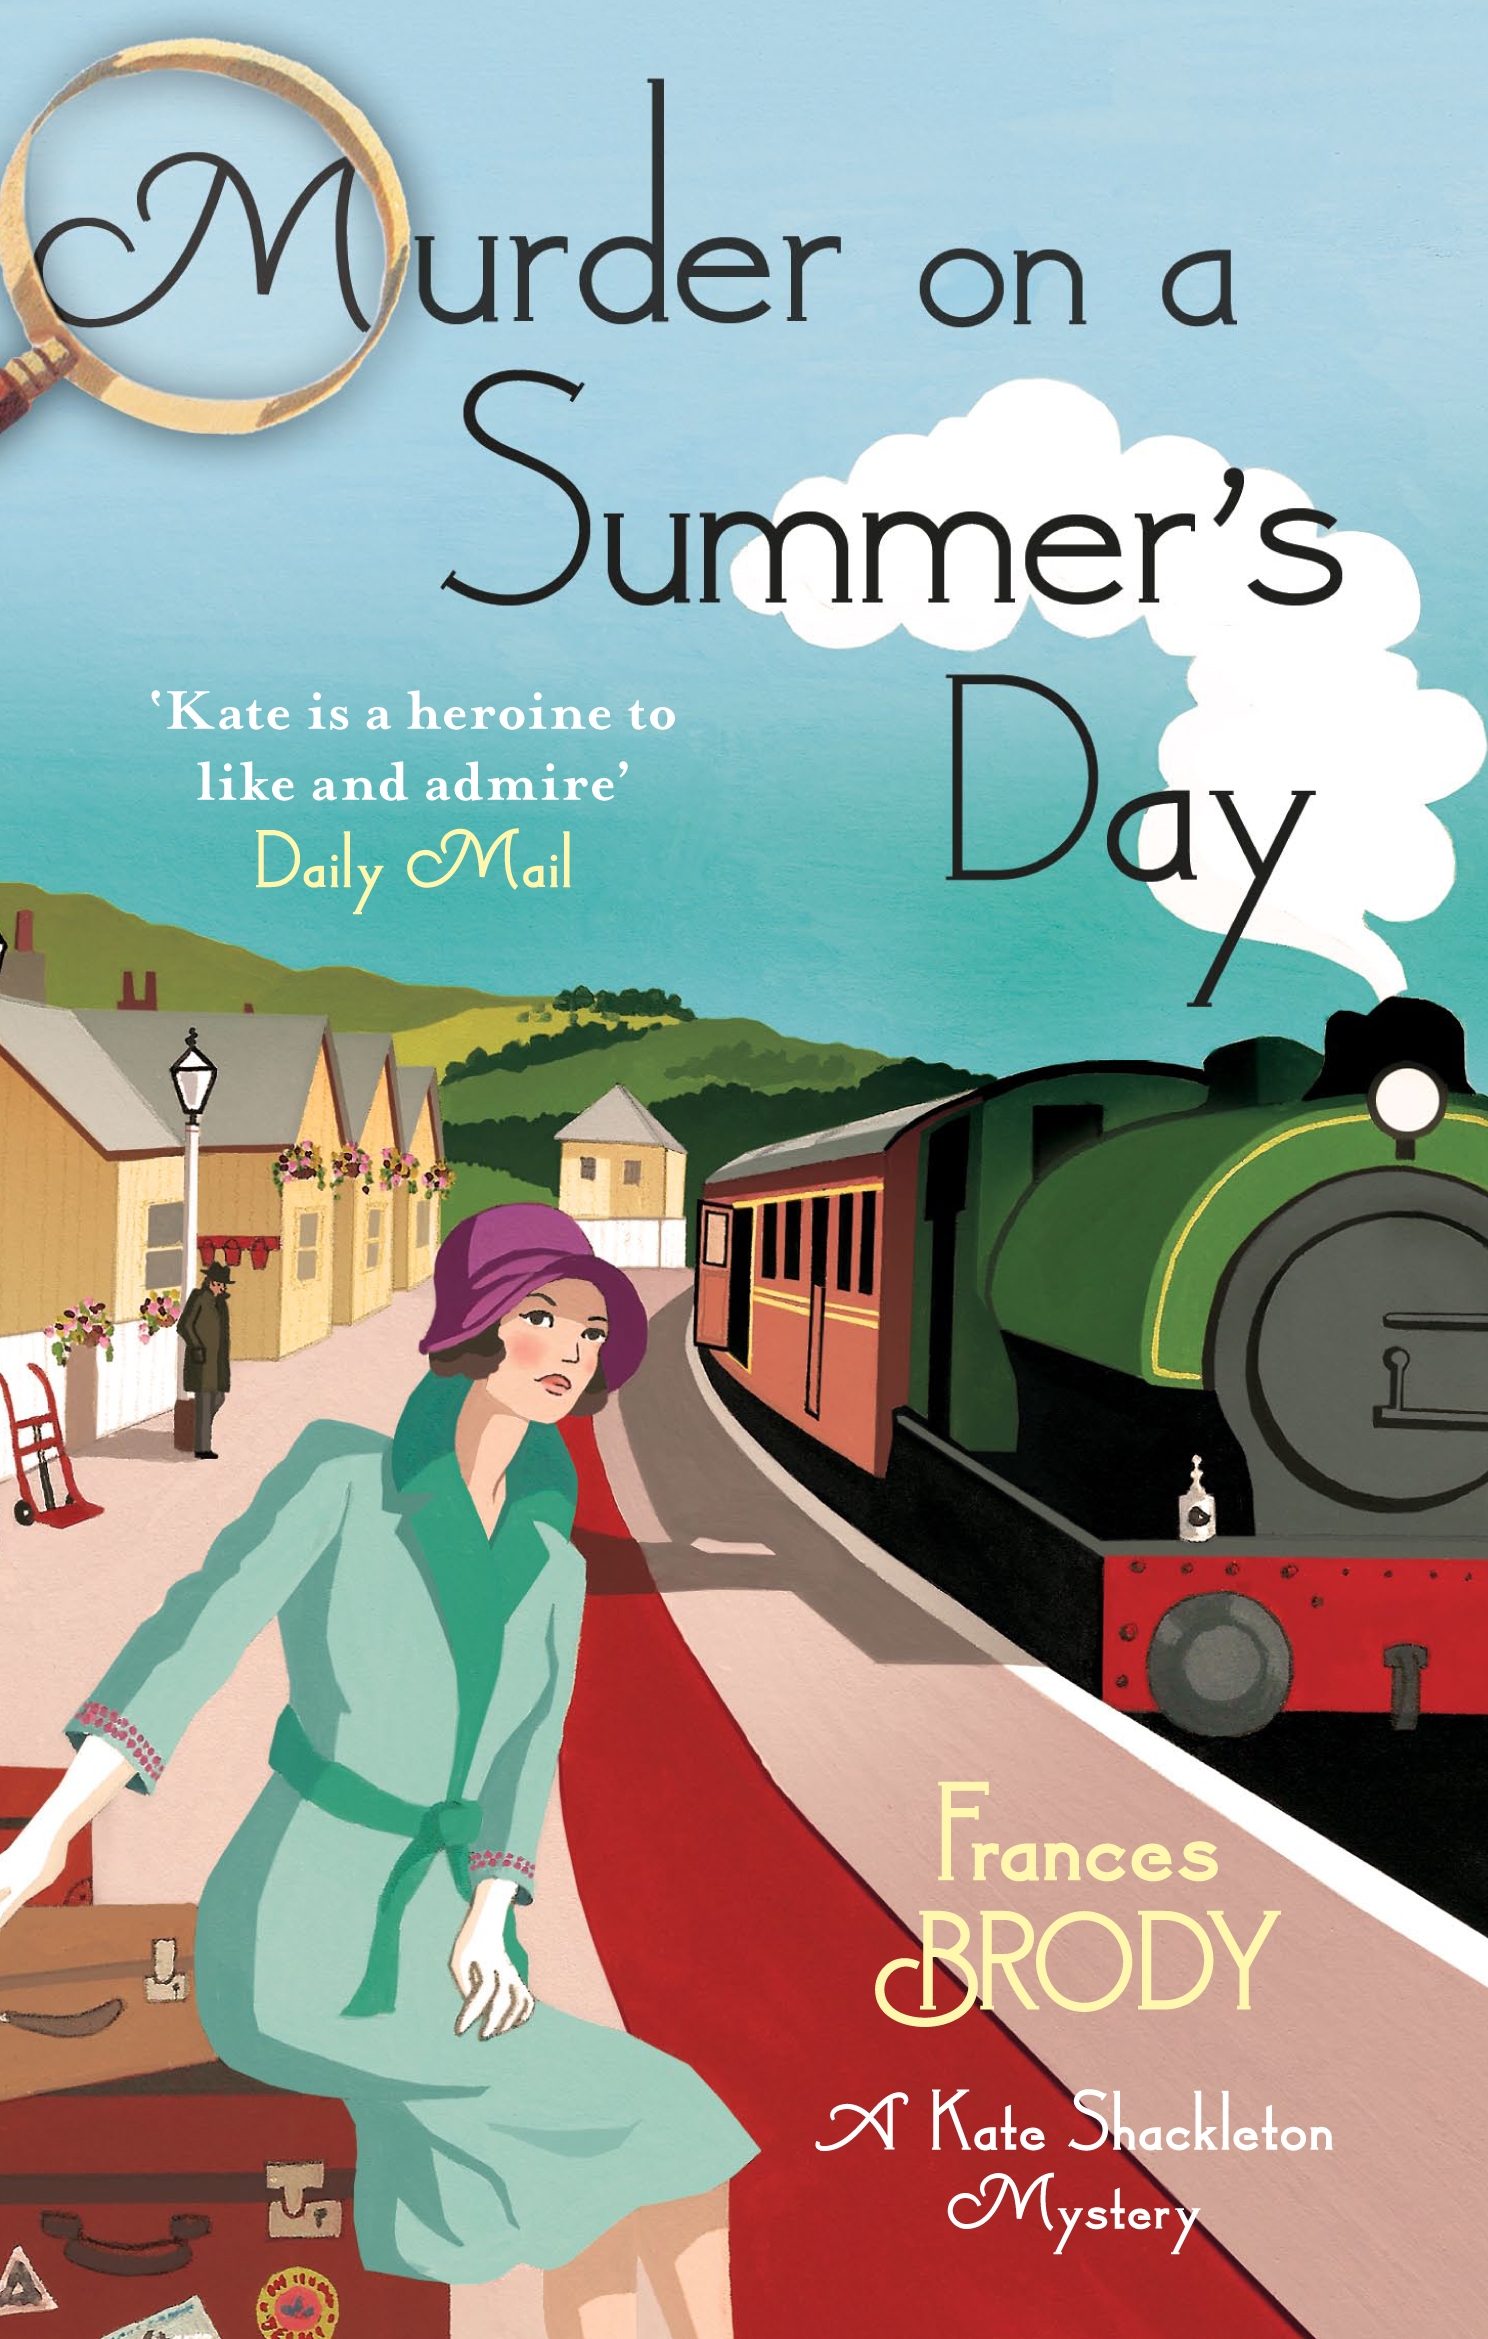 Frances Brody's 'Murder on a Summer's Day'